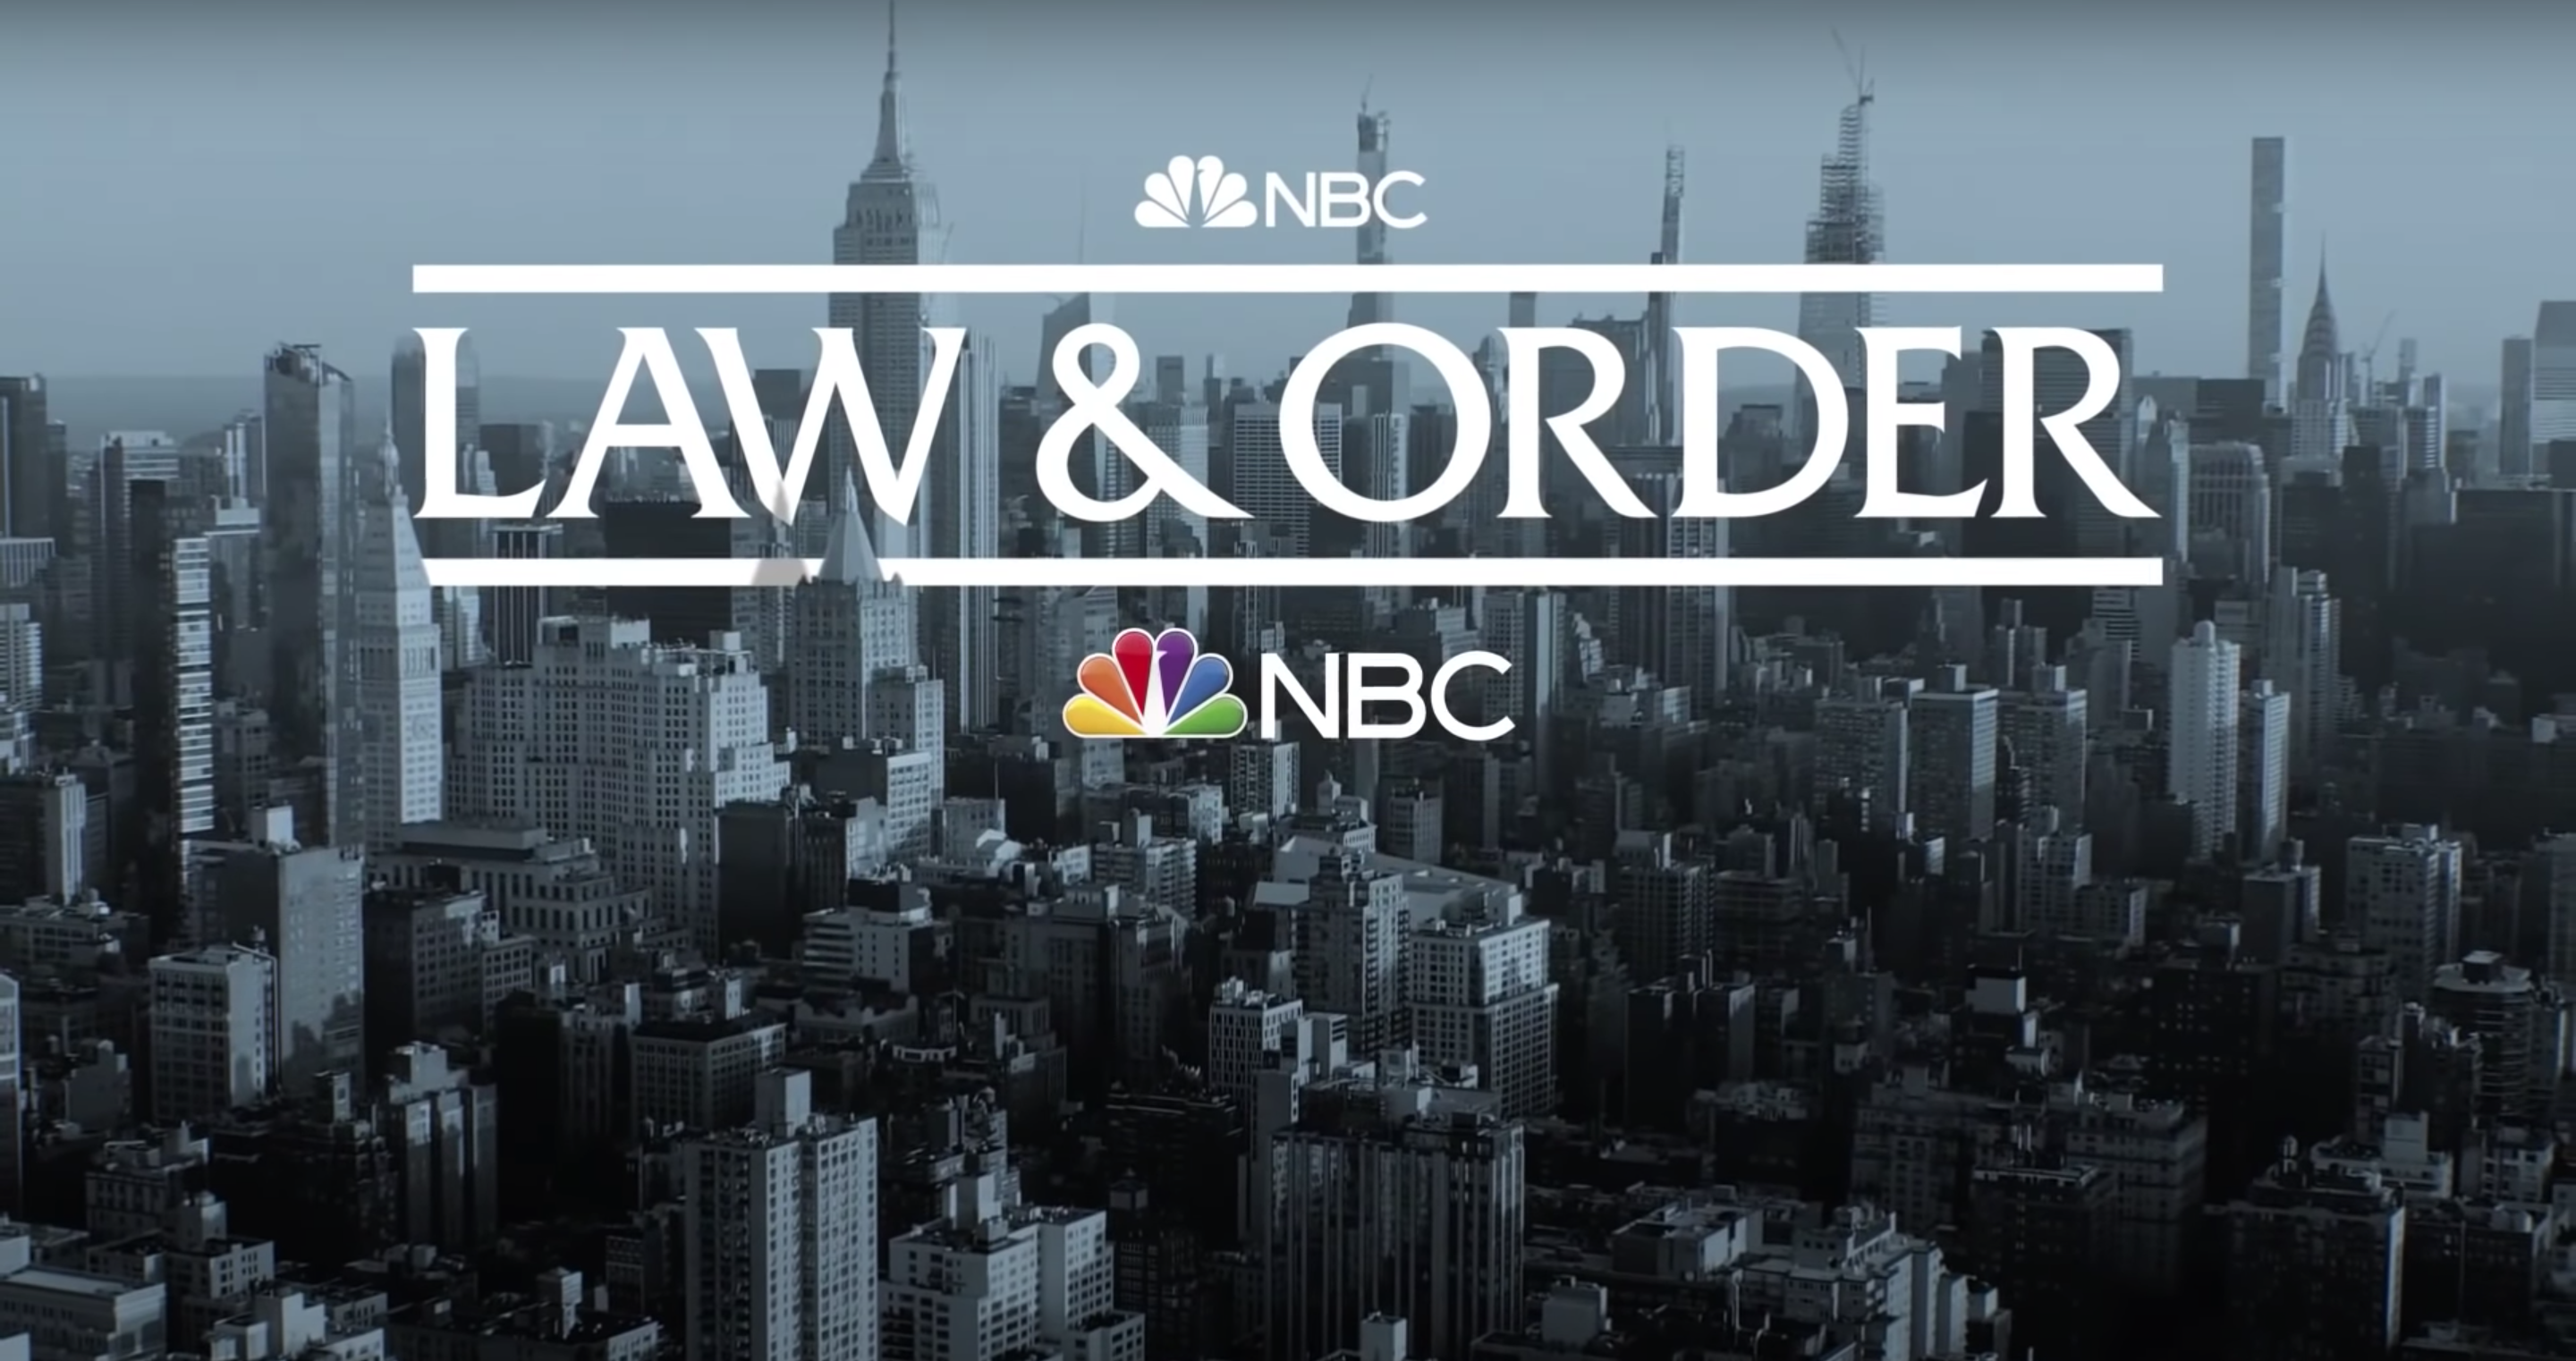 Law & Order' Season 21 finale: How to watch, stream for free 